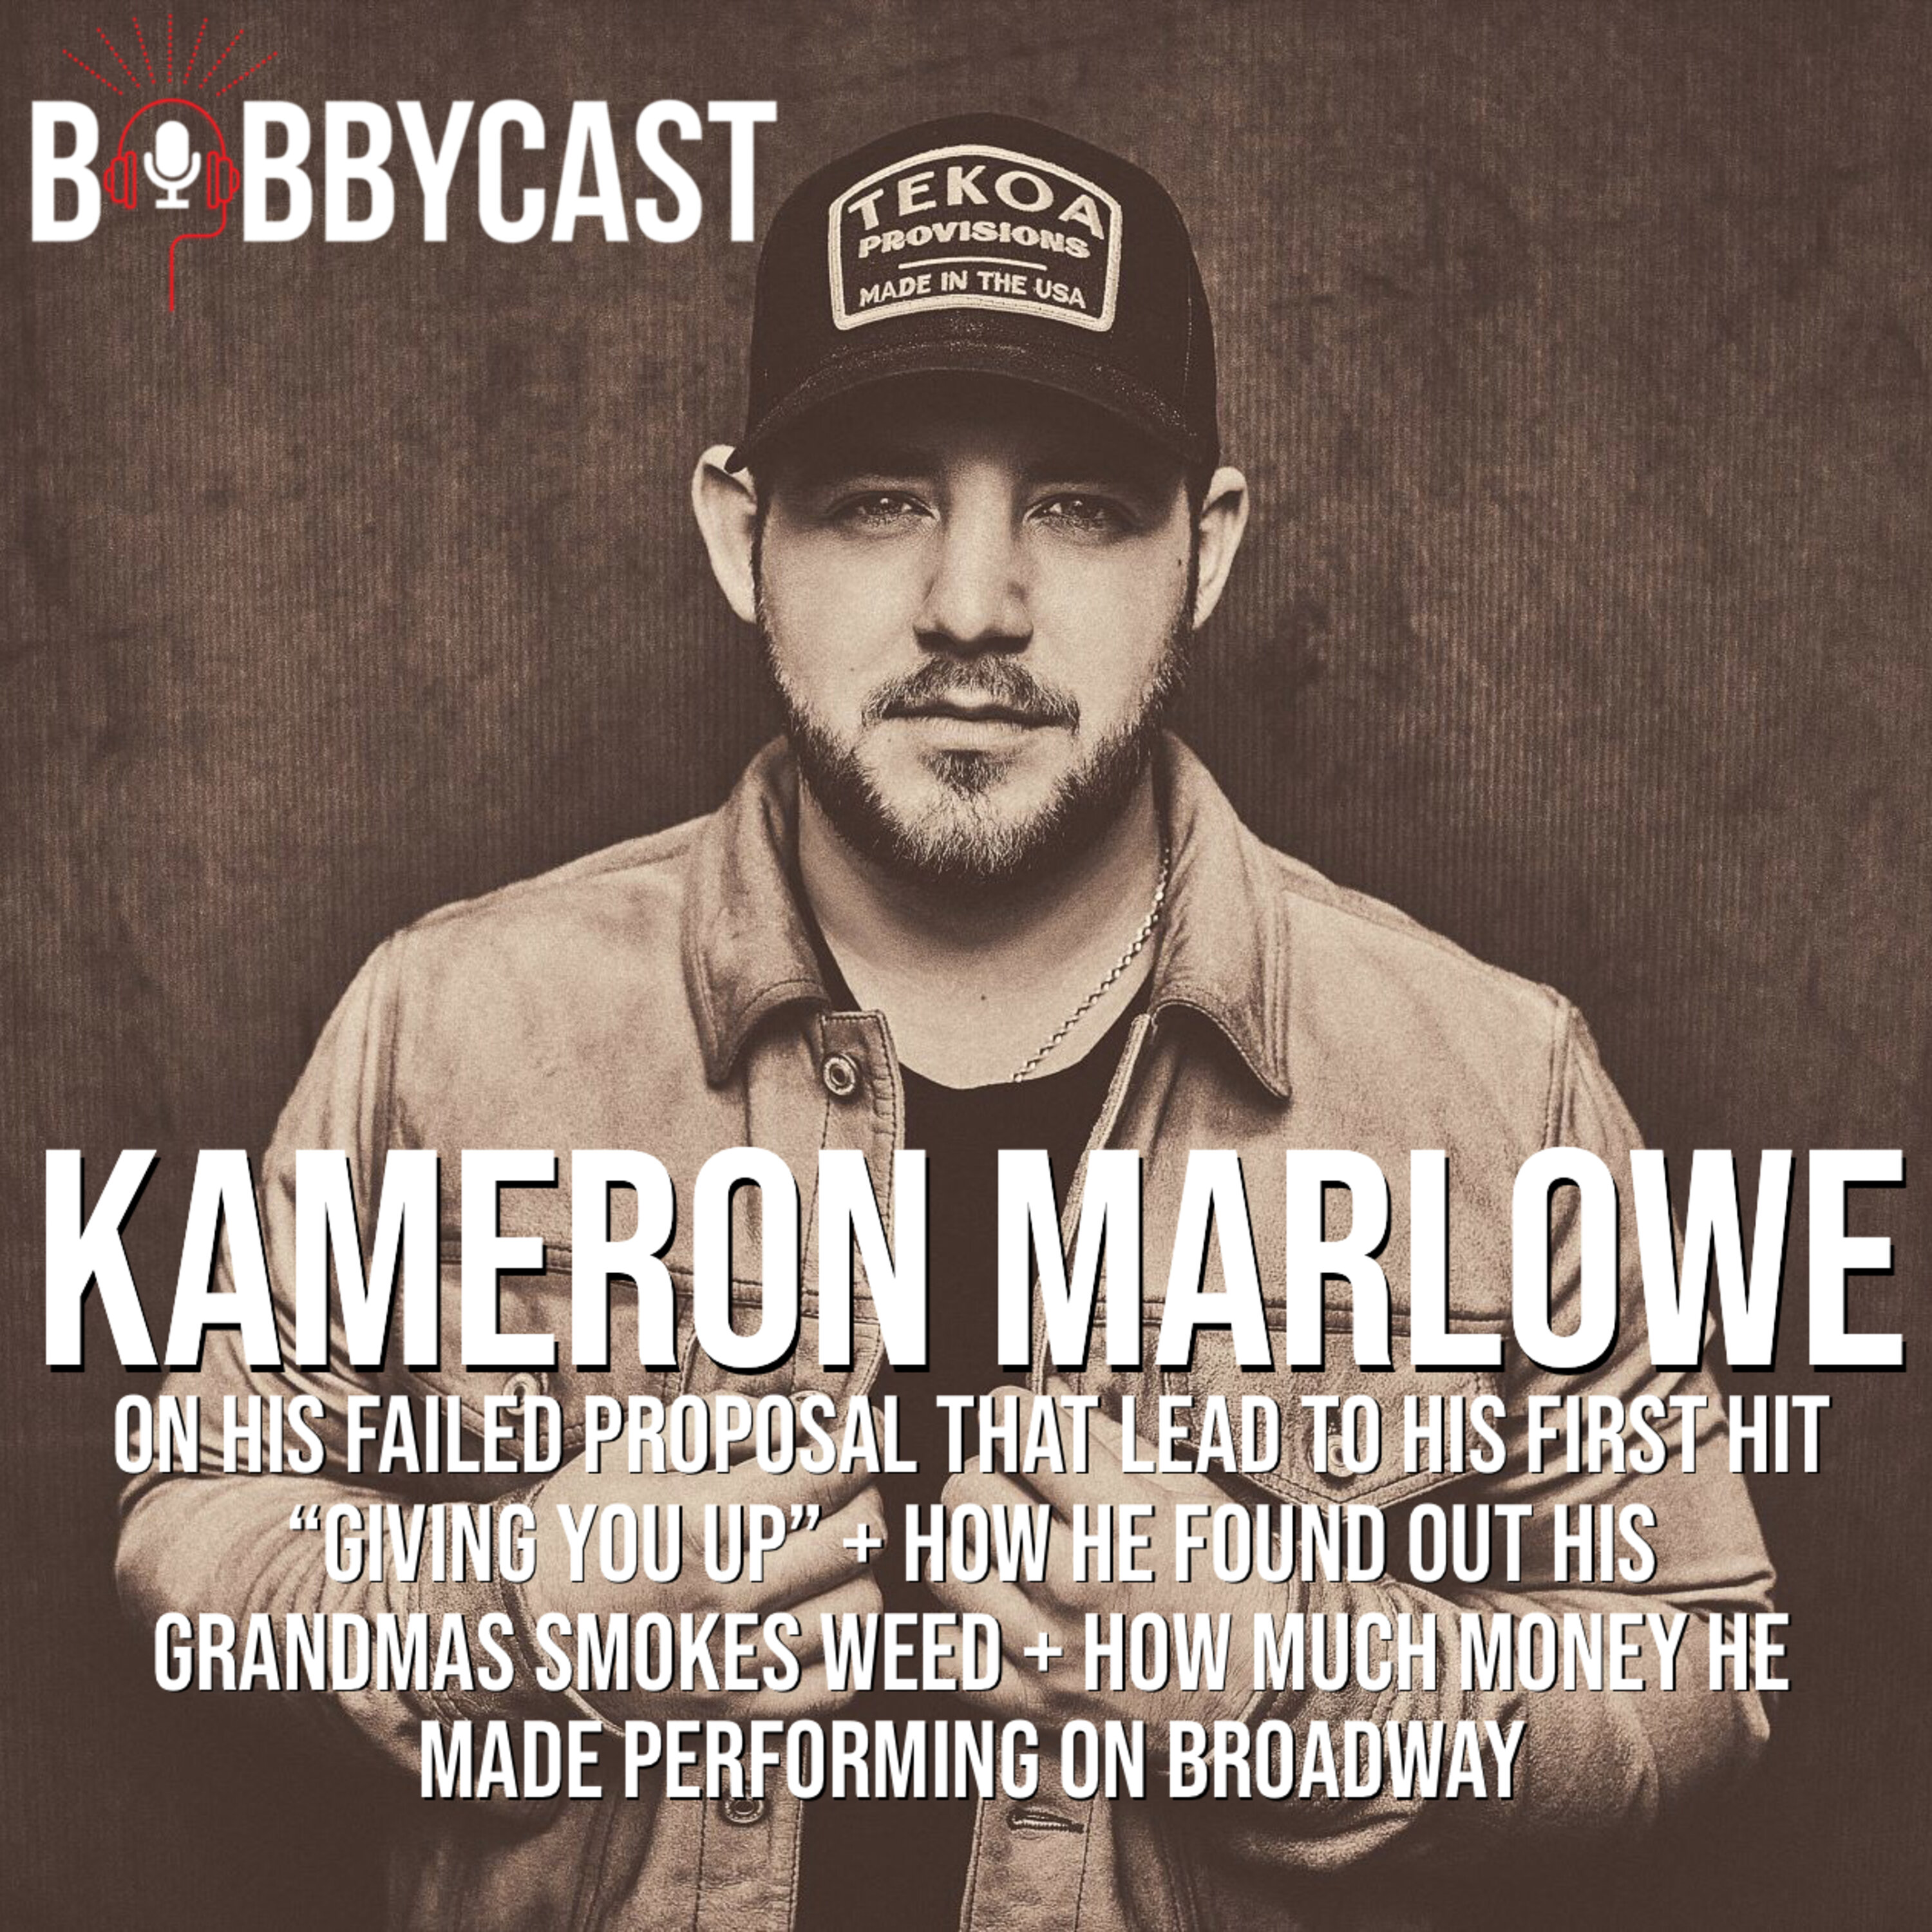 #382 - Kameron Marlowe on his Failed Proposal That Lead to His First Hit “Giving You Up” + How He Found Out His Grandmas Smokes Weed + How Much Money He Made Performing on Broadway